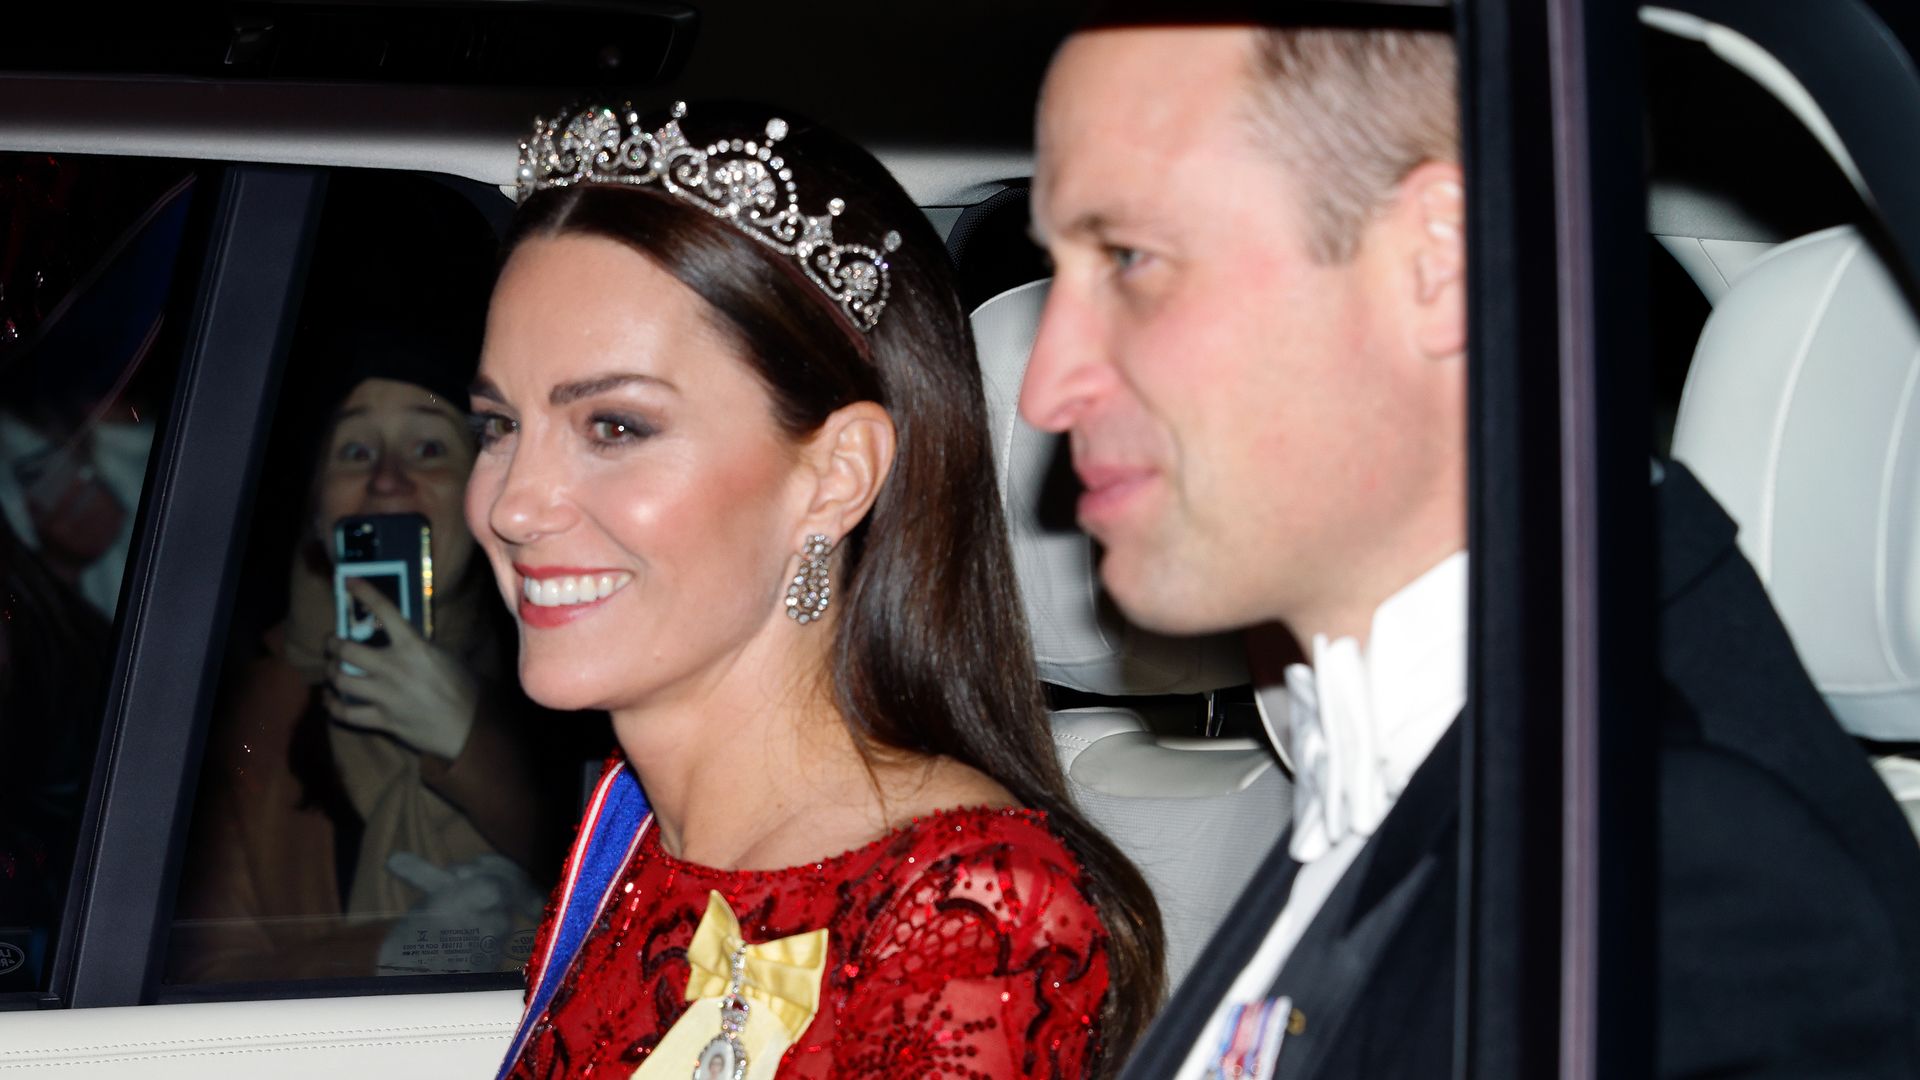 Kate Middleton wearing a tiara in a car with Prince William